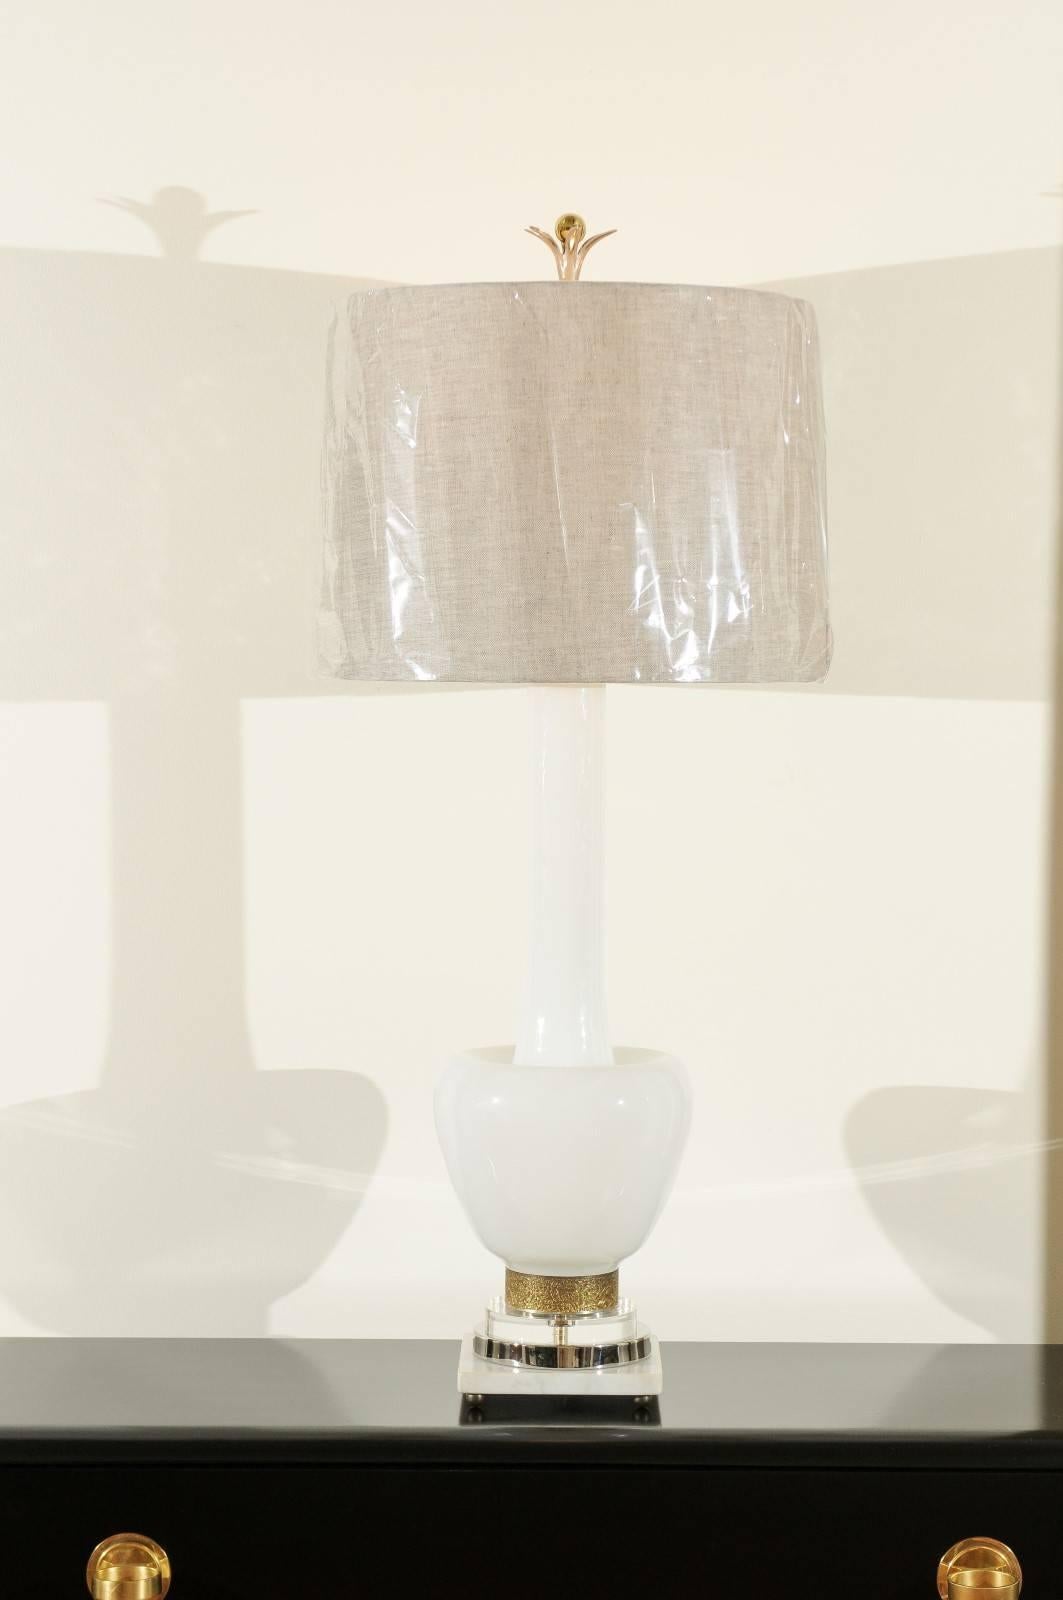 An exceptional pair of large-scale blown Murano glass lamps. Stunning cream form atop a fabulous custom designed four-step base of marble, nickel, Lucite and accented with an embossed brass cuff. Custom-made petal and ball finials in nickel and